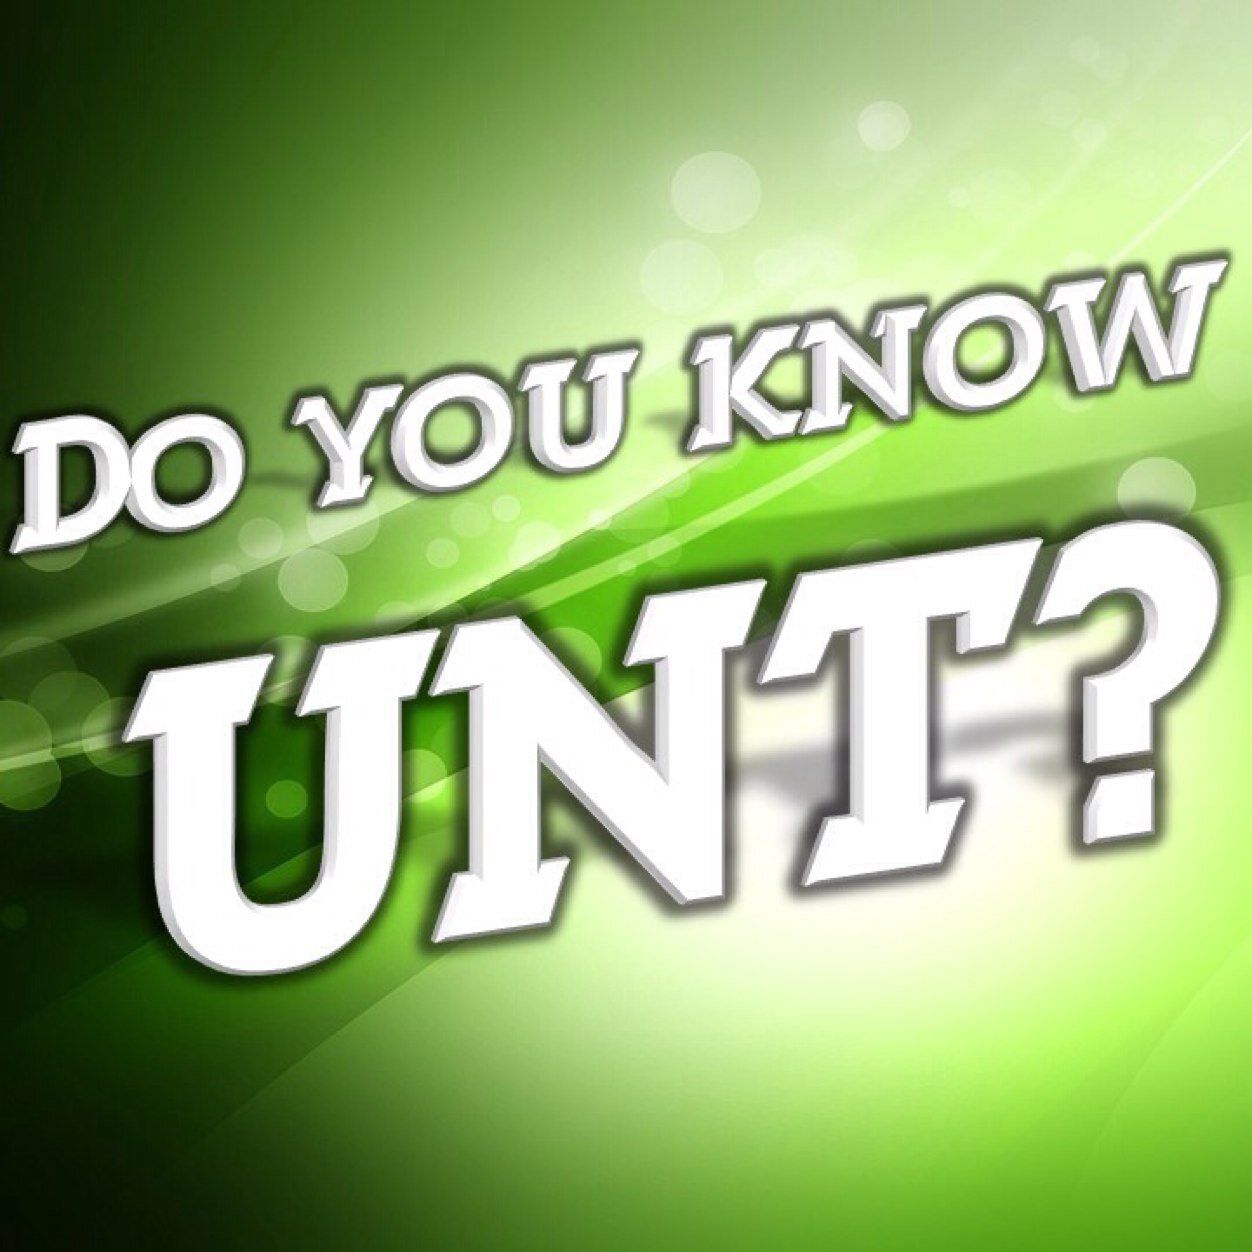 Fun facts and amazing history about everything Denton and University of North Texas. Submit yours with #DoYouKnowUNT